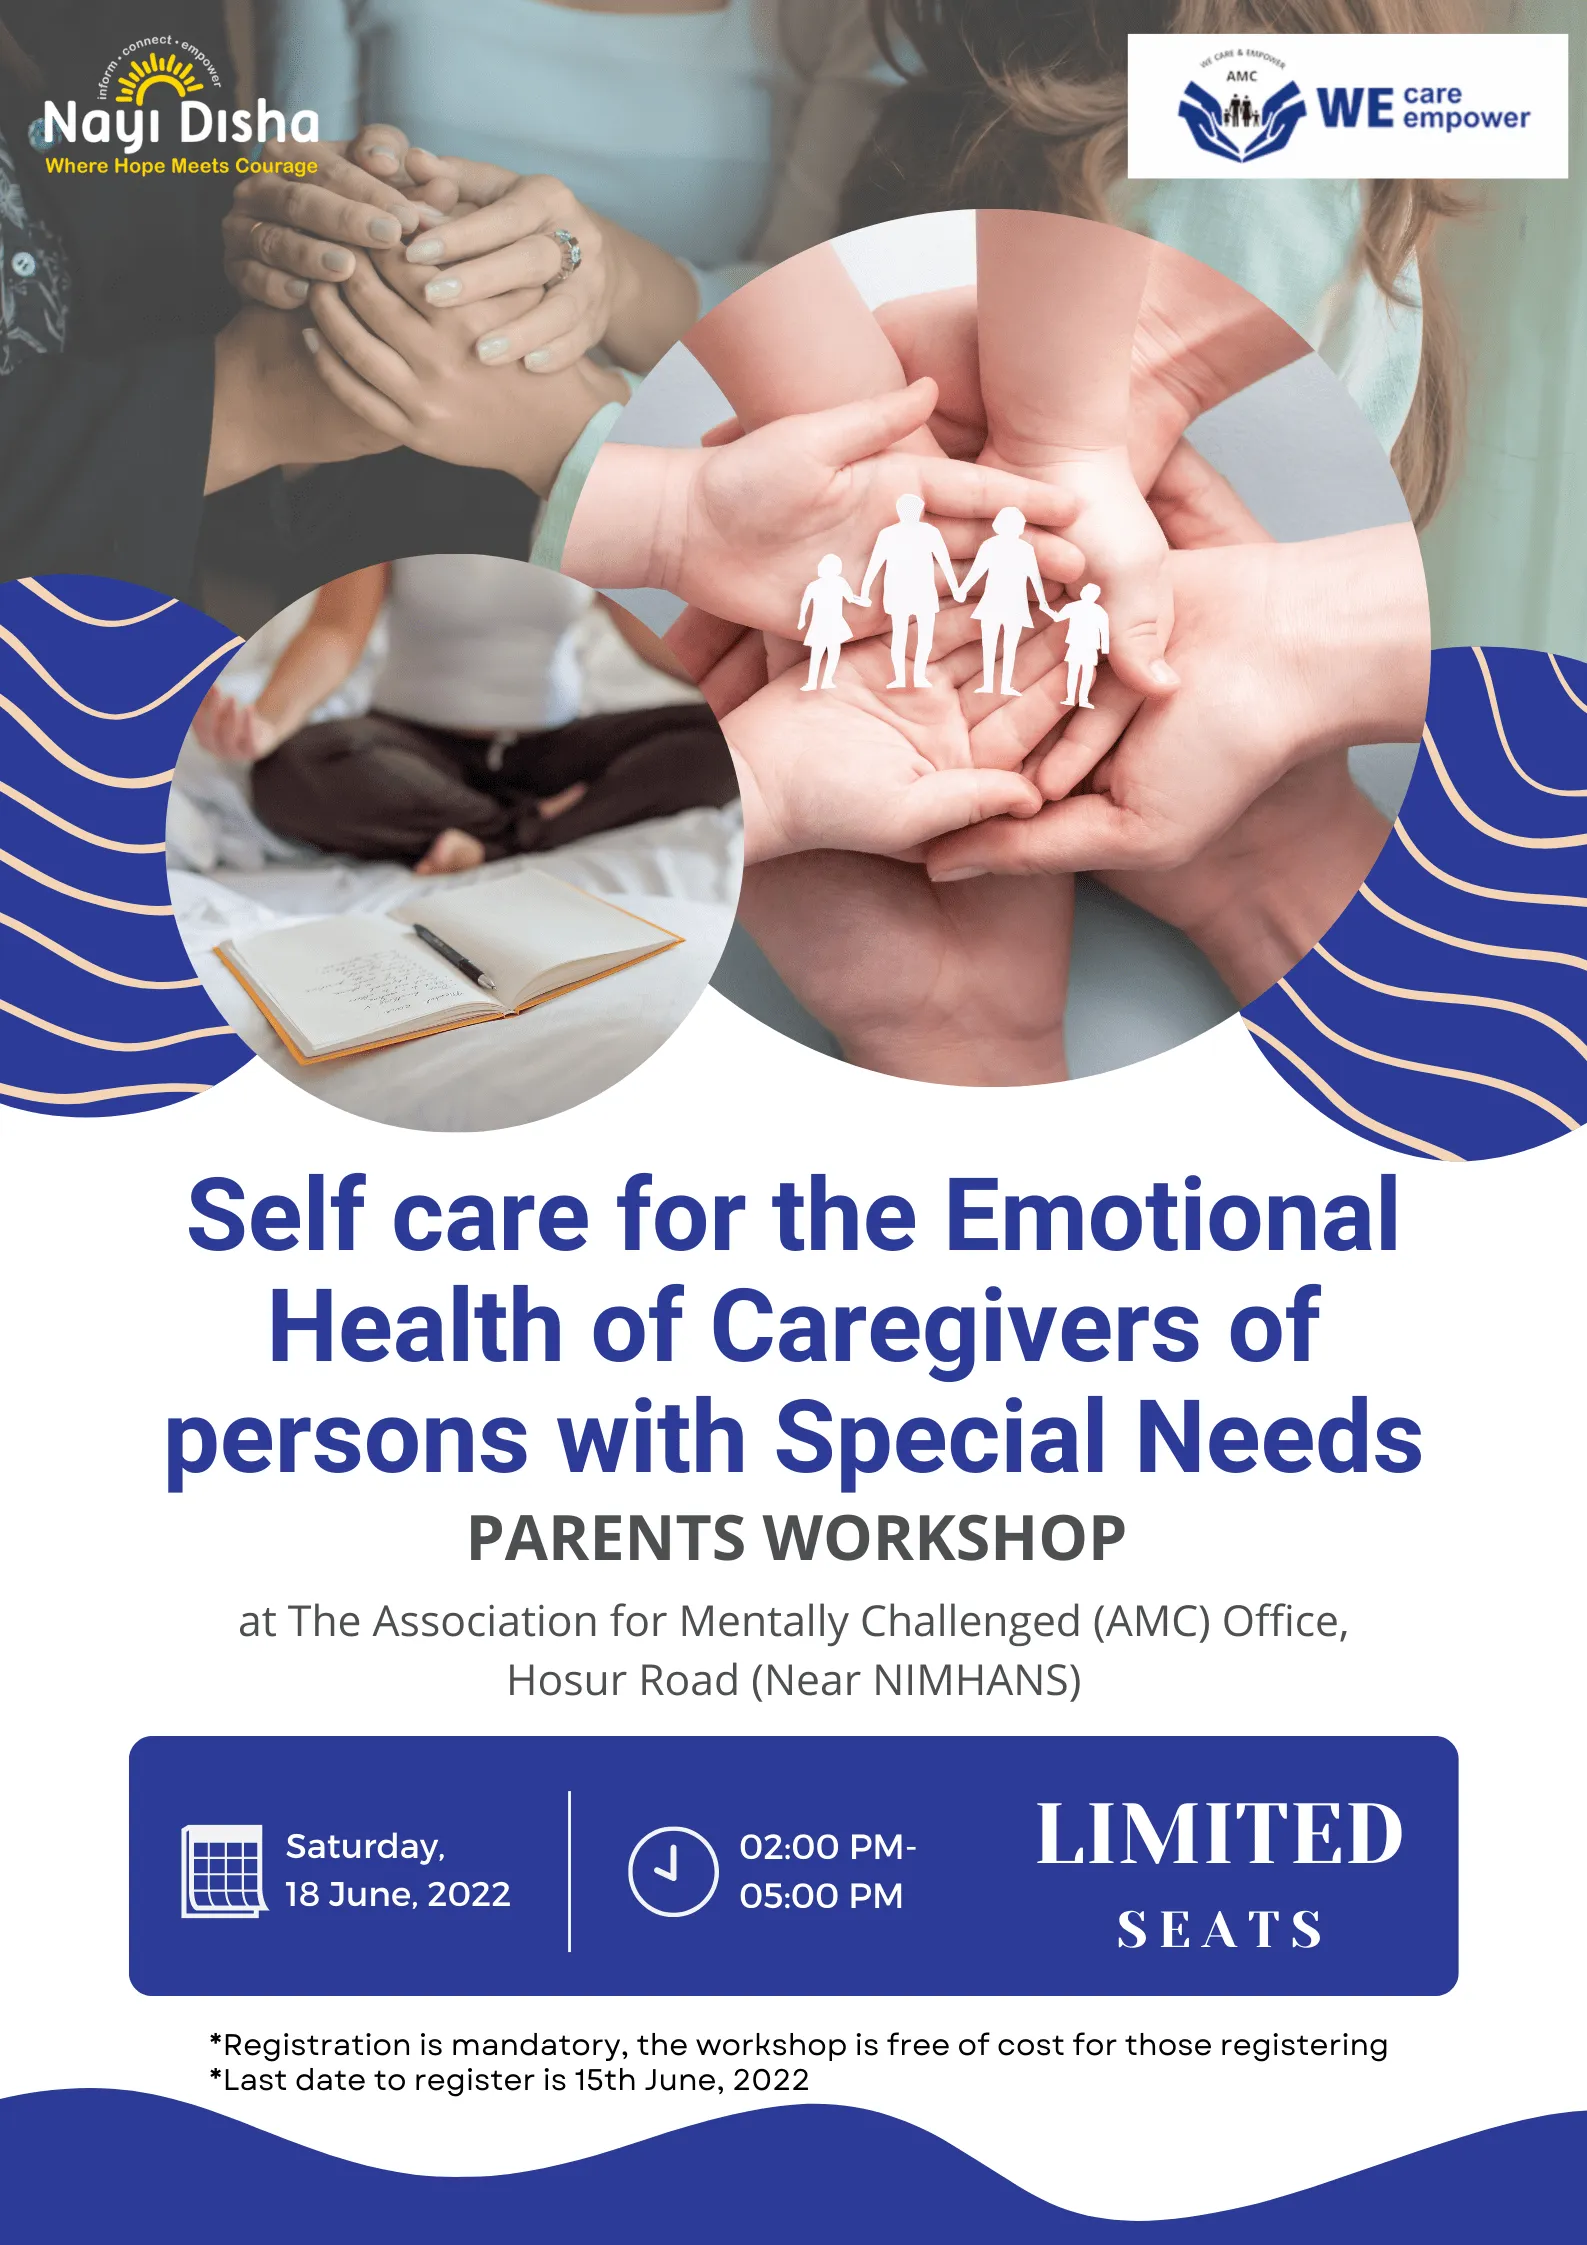 Self care for the Emotional health of Caregivers of persons with Special needs